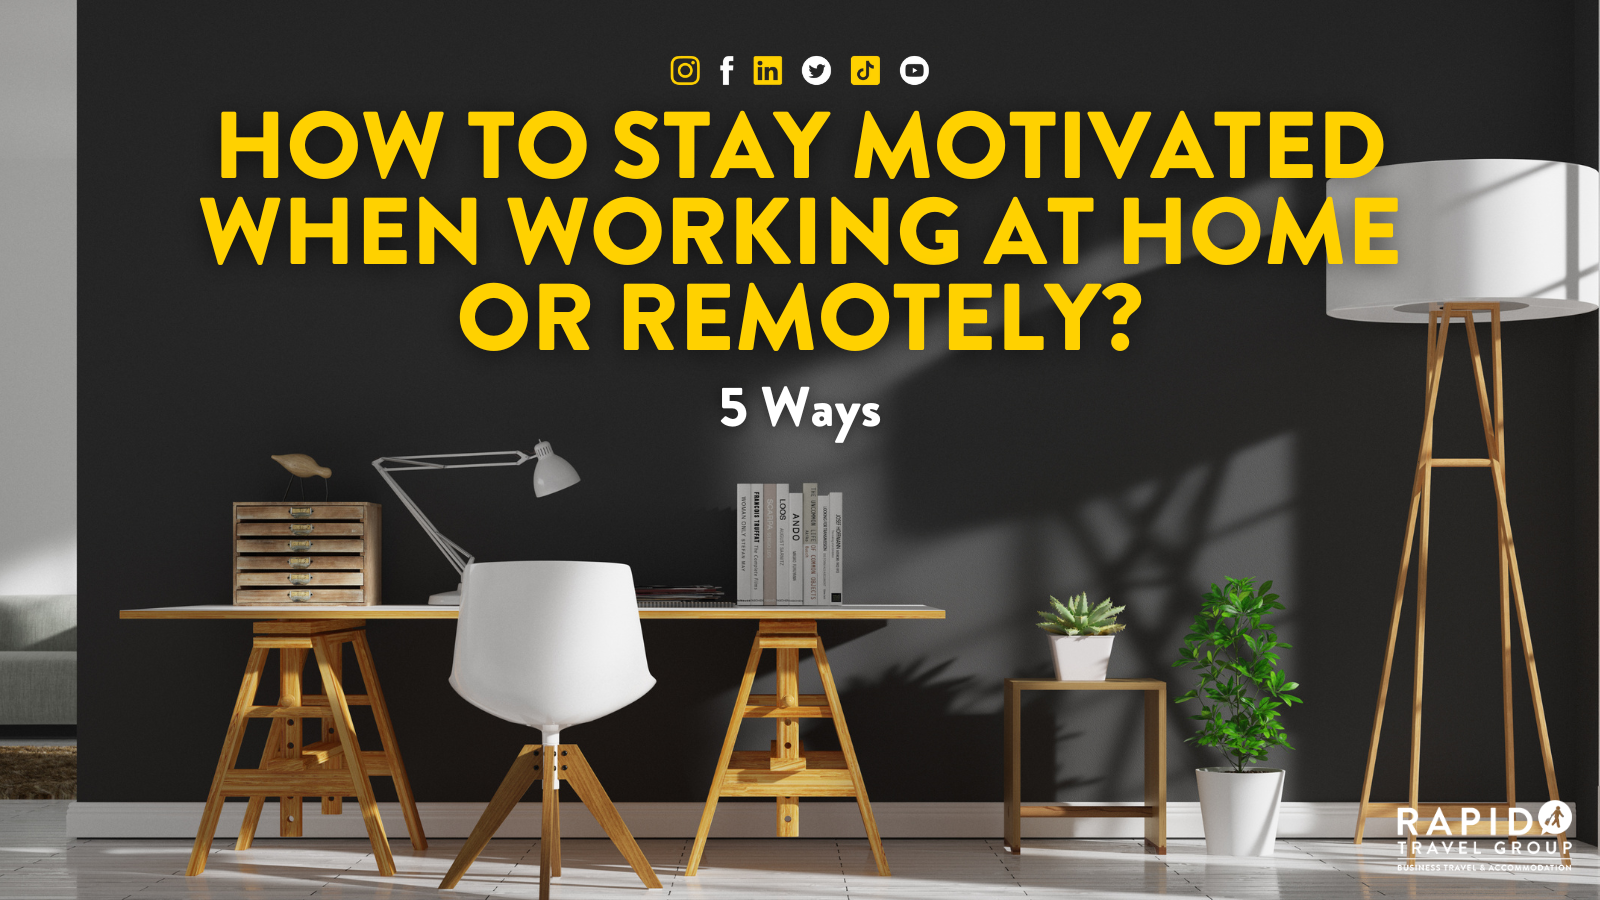 How to stay motivated when working at home or remotely?